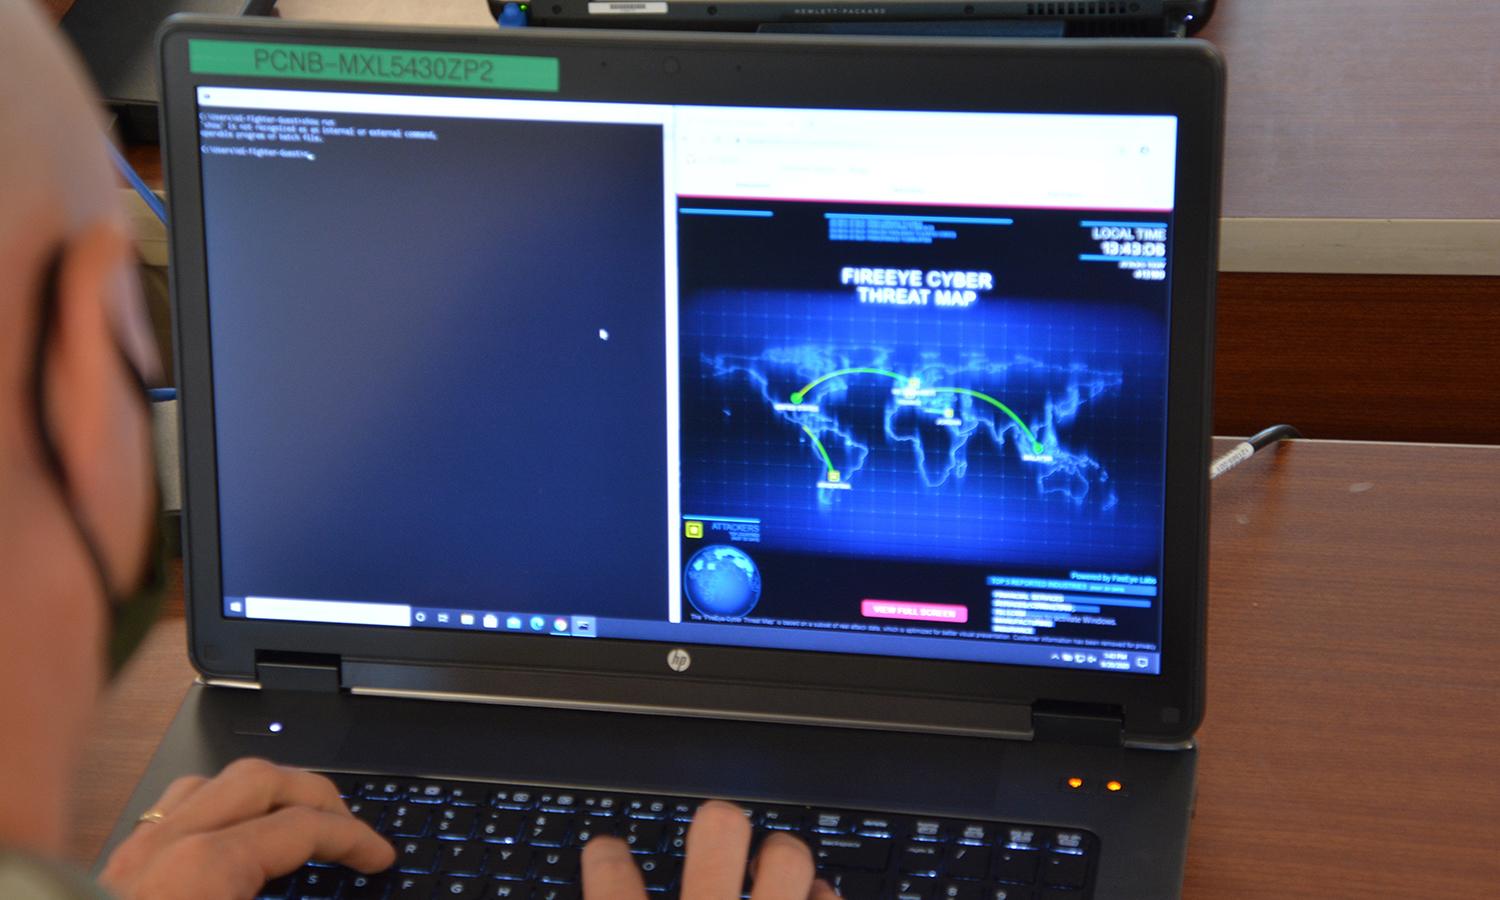 A soldier participates in a cybersecurity exercise using a laptop computer